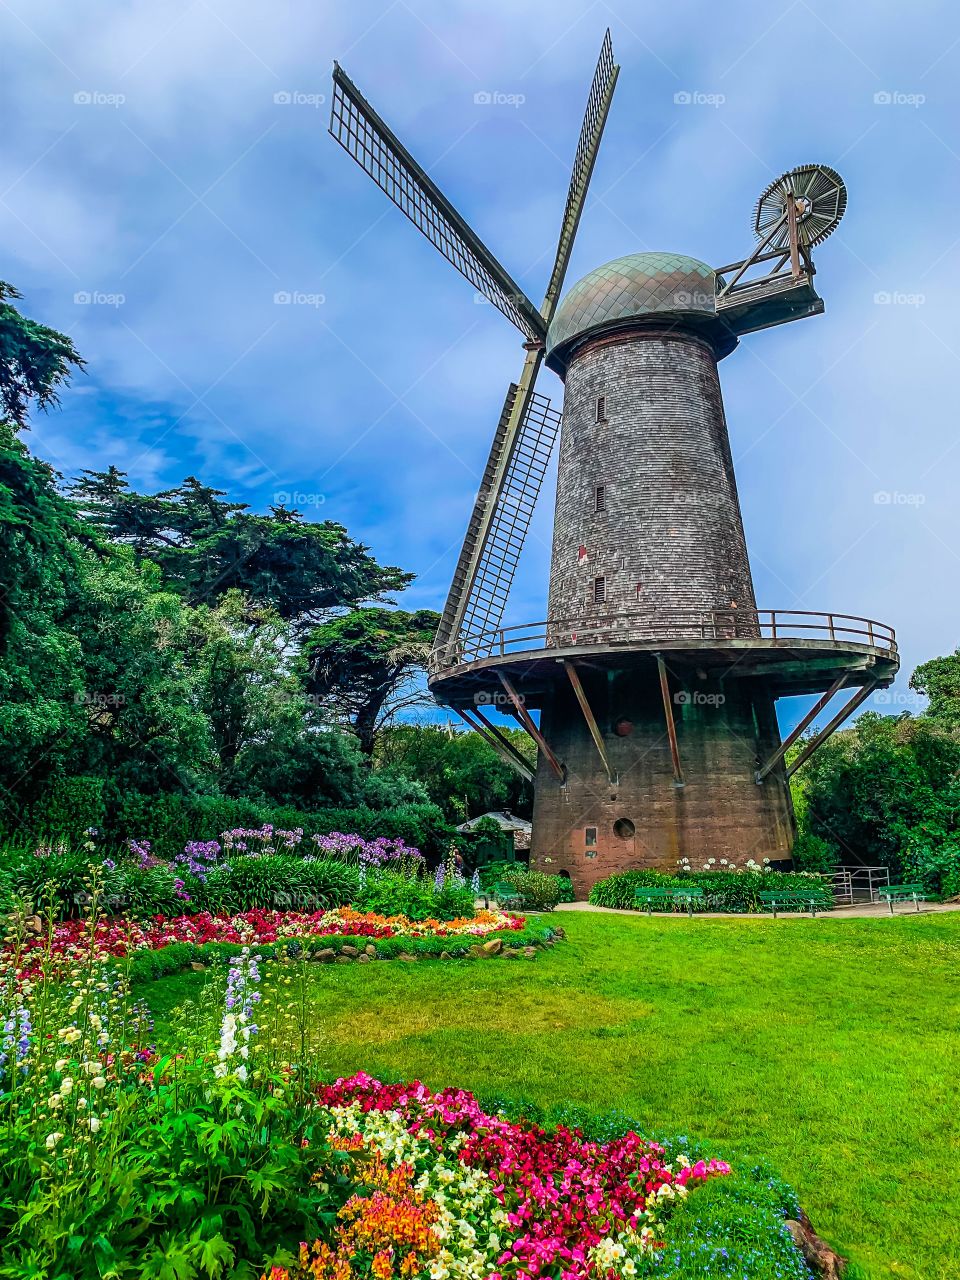 This is a giant and lush garden filled with colors and shades of flowers and trees. The windmill is an open of Dutch windmill and is located in San Francisco at the golden gate park. It is quite a sight to behold for anyone and mesmerizing.